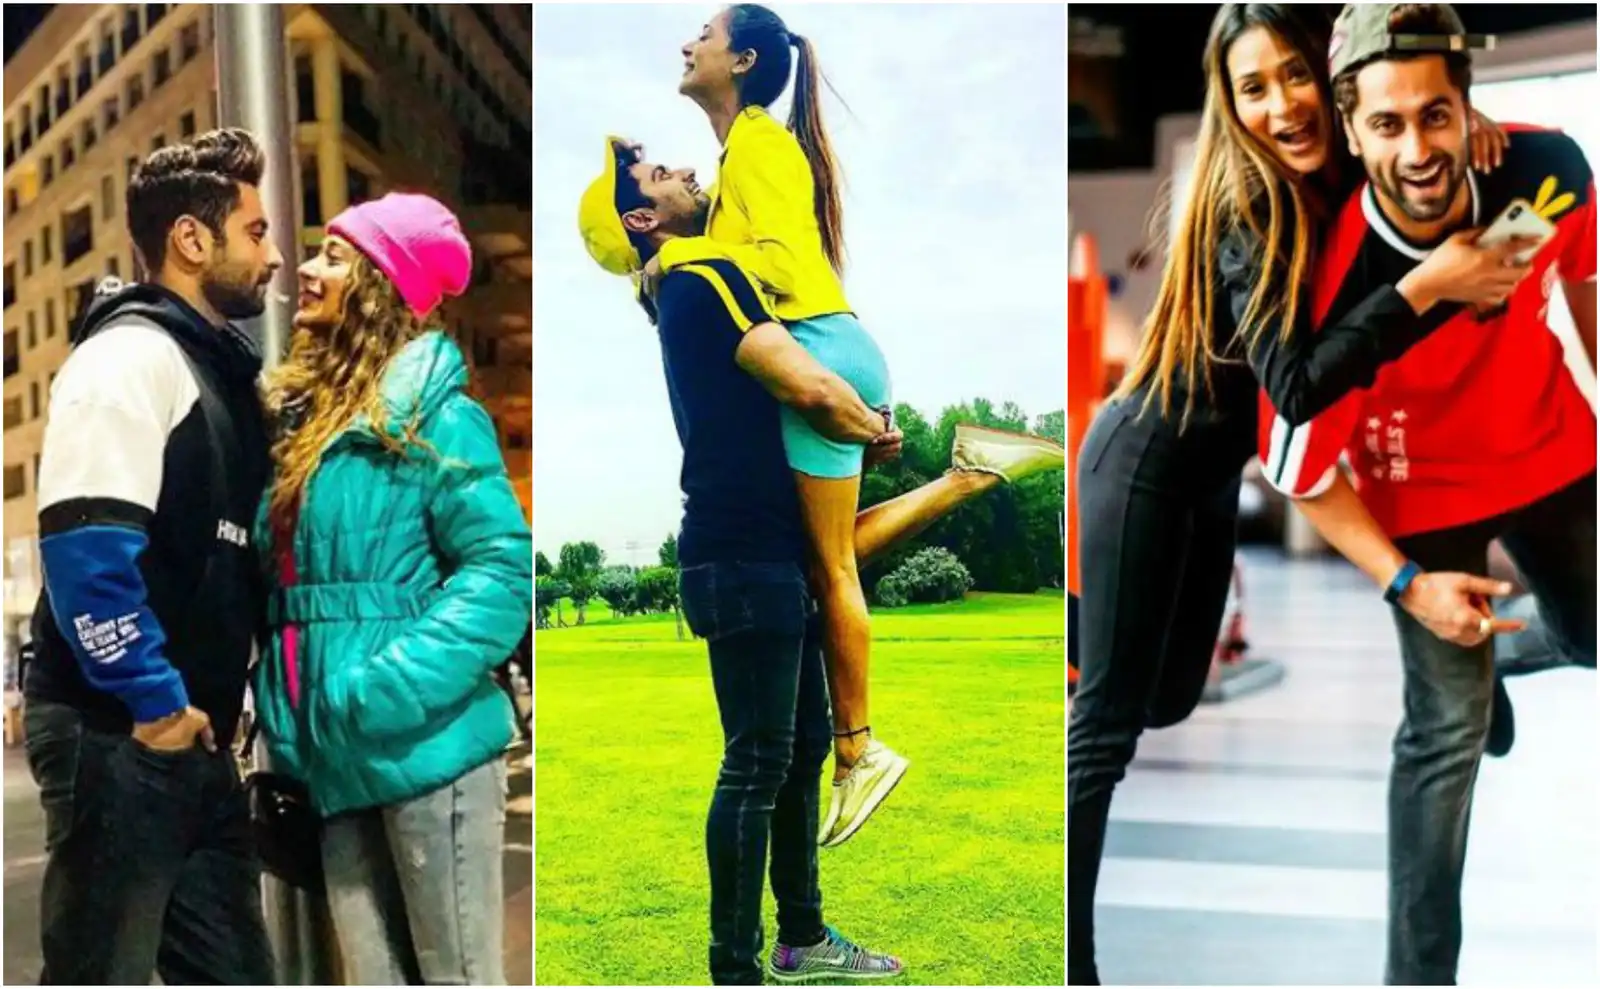 In Pictures: Sara Khan And Ankit Gera’s Love Story Is As Beautiful As Their Instagram Posts